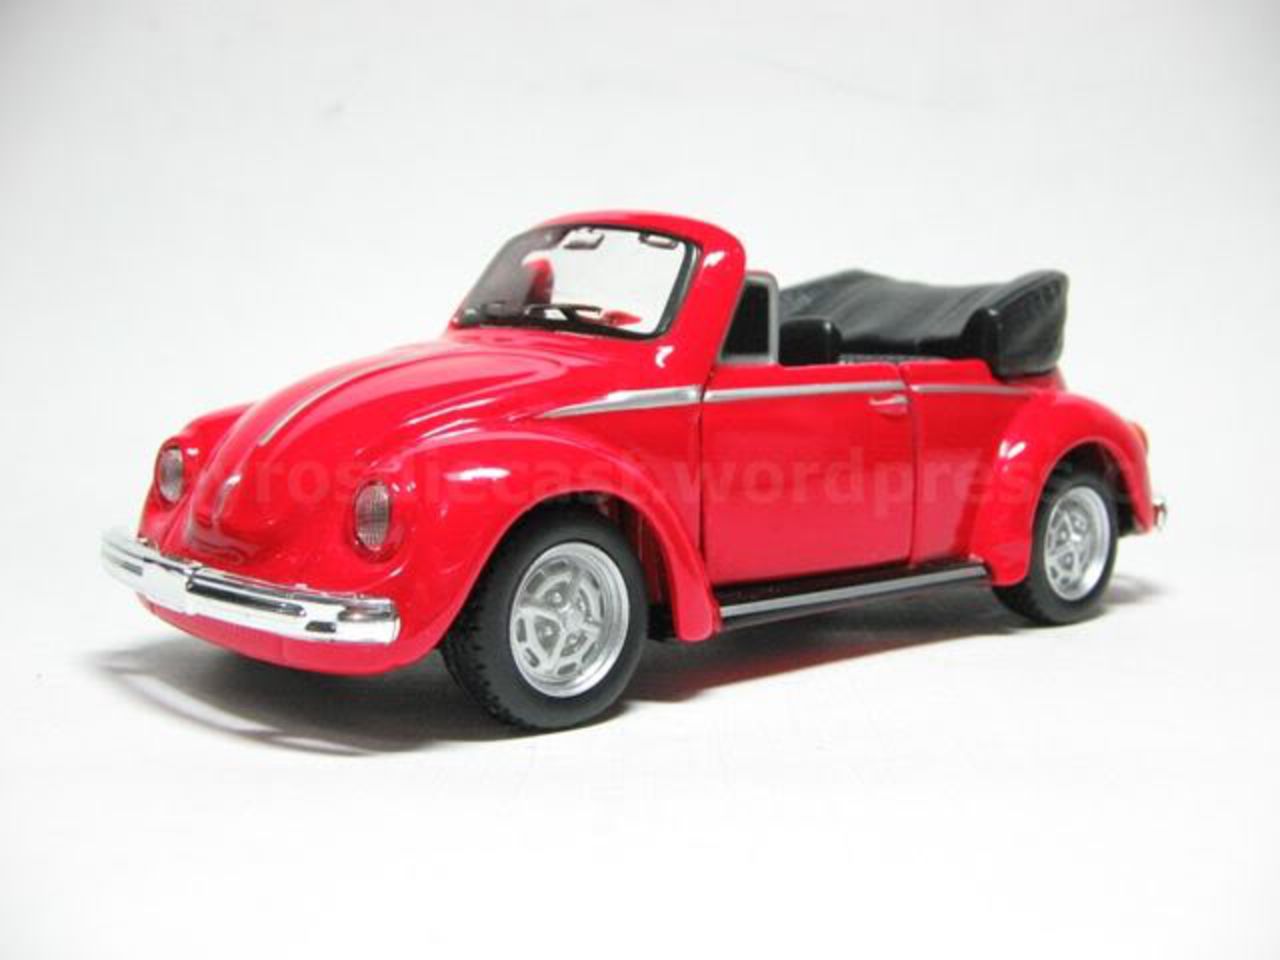 Volkswagen 1303 Cabriolet. Posted: May 3, 2011 in OTHERS